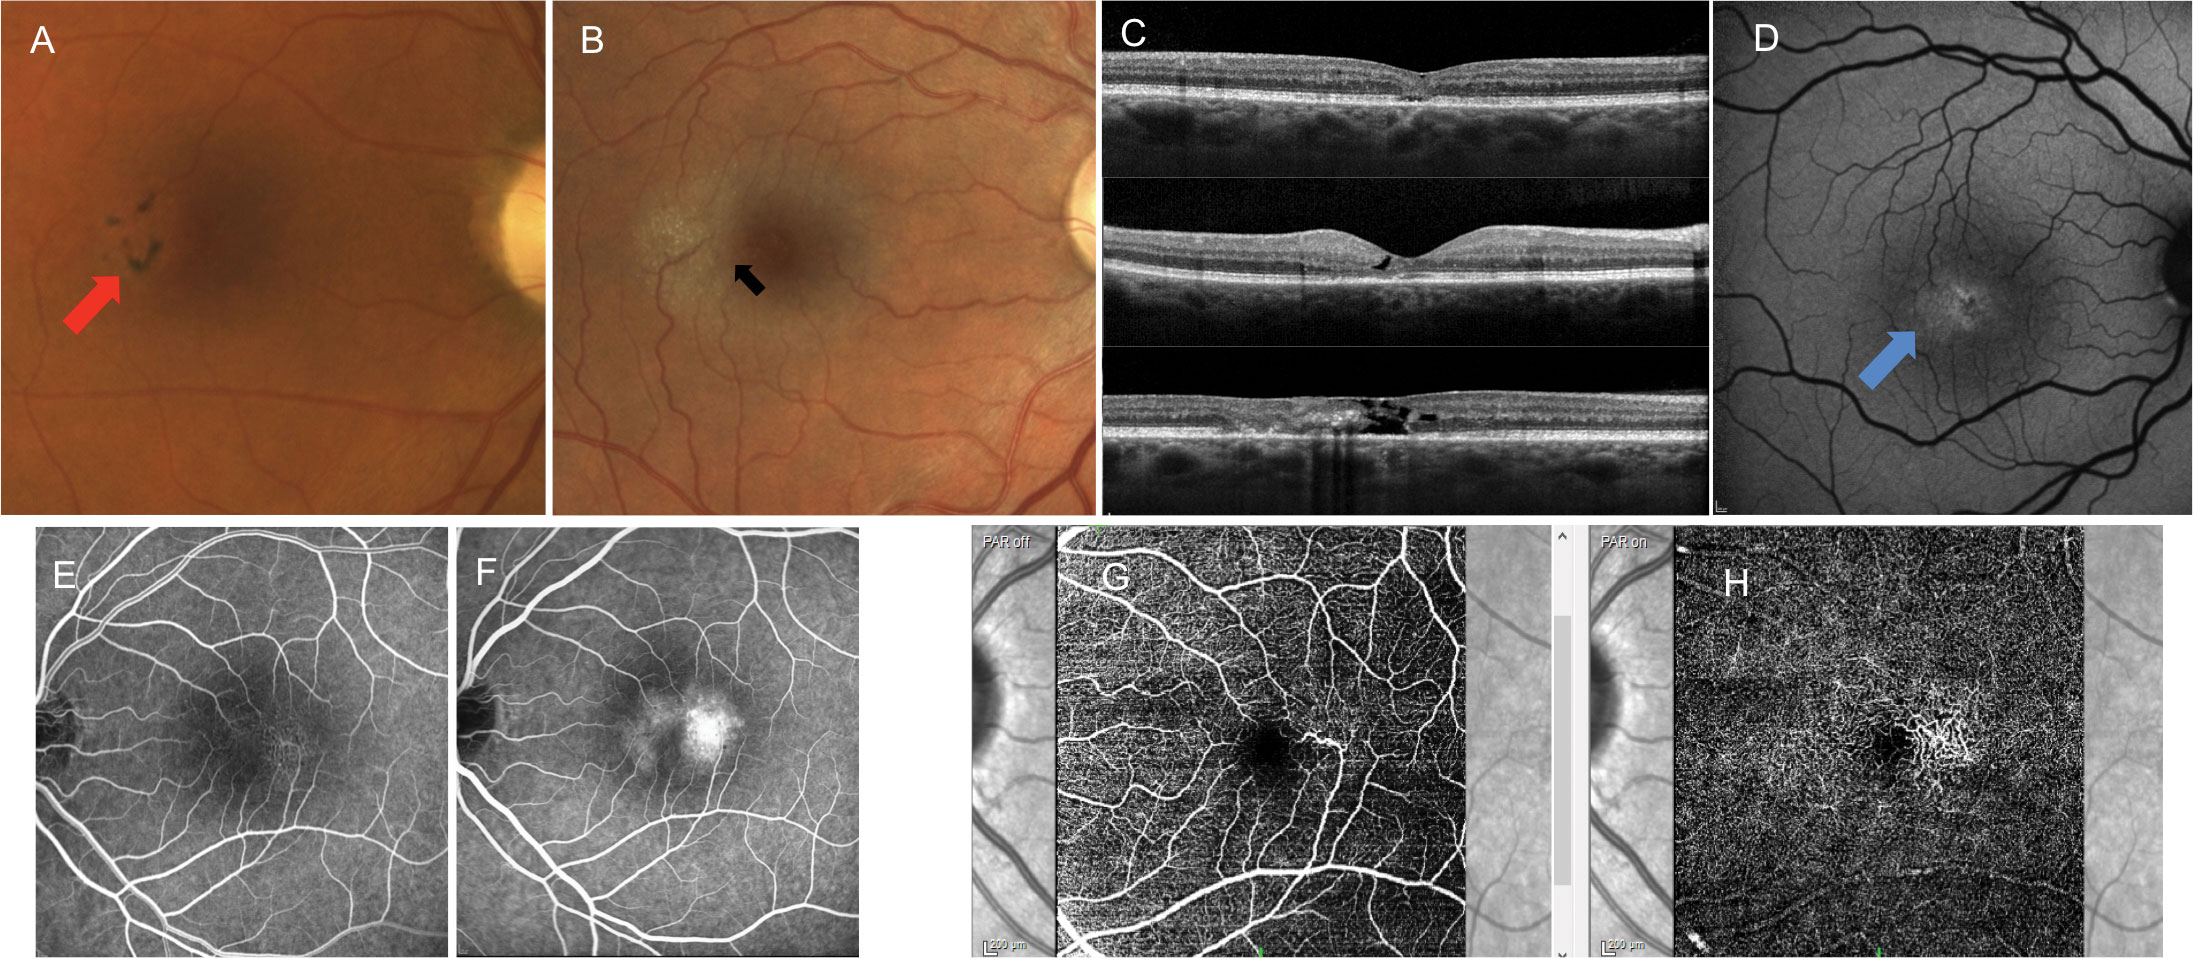 Patients with MT2 may present with the following findings: (A) pigmentary plaques (red arrow), (B) juxtafoveal whitening concentrated temporally, crystalline deposits and right angle vessels (black arrow), (C) variable retinal and photoreceptor atrophy and classic appearance of internal limiting membrane drape on OCT, (D) altered autofluorescent patterns typically showing first as hyper-autofluorescence temporally (blue arrow), (E) juxtafoveal telangiectatic vessels concentrated temporally on intravenous FA that leak in late stages and (F) telangiectatic vessels concentrated temporally in both the superficial (G) and deep (H) vascular plexus on OCT-A. These images are all examples of different patients.